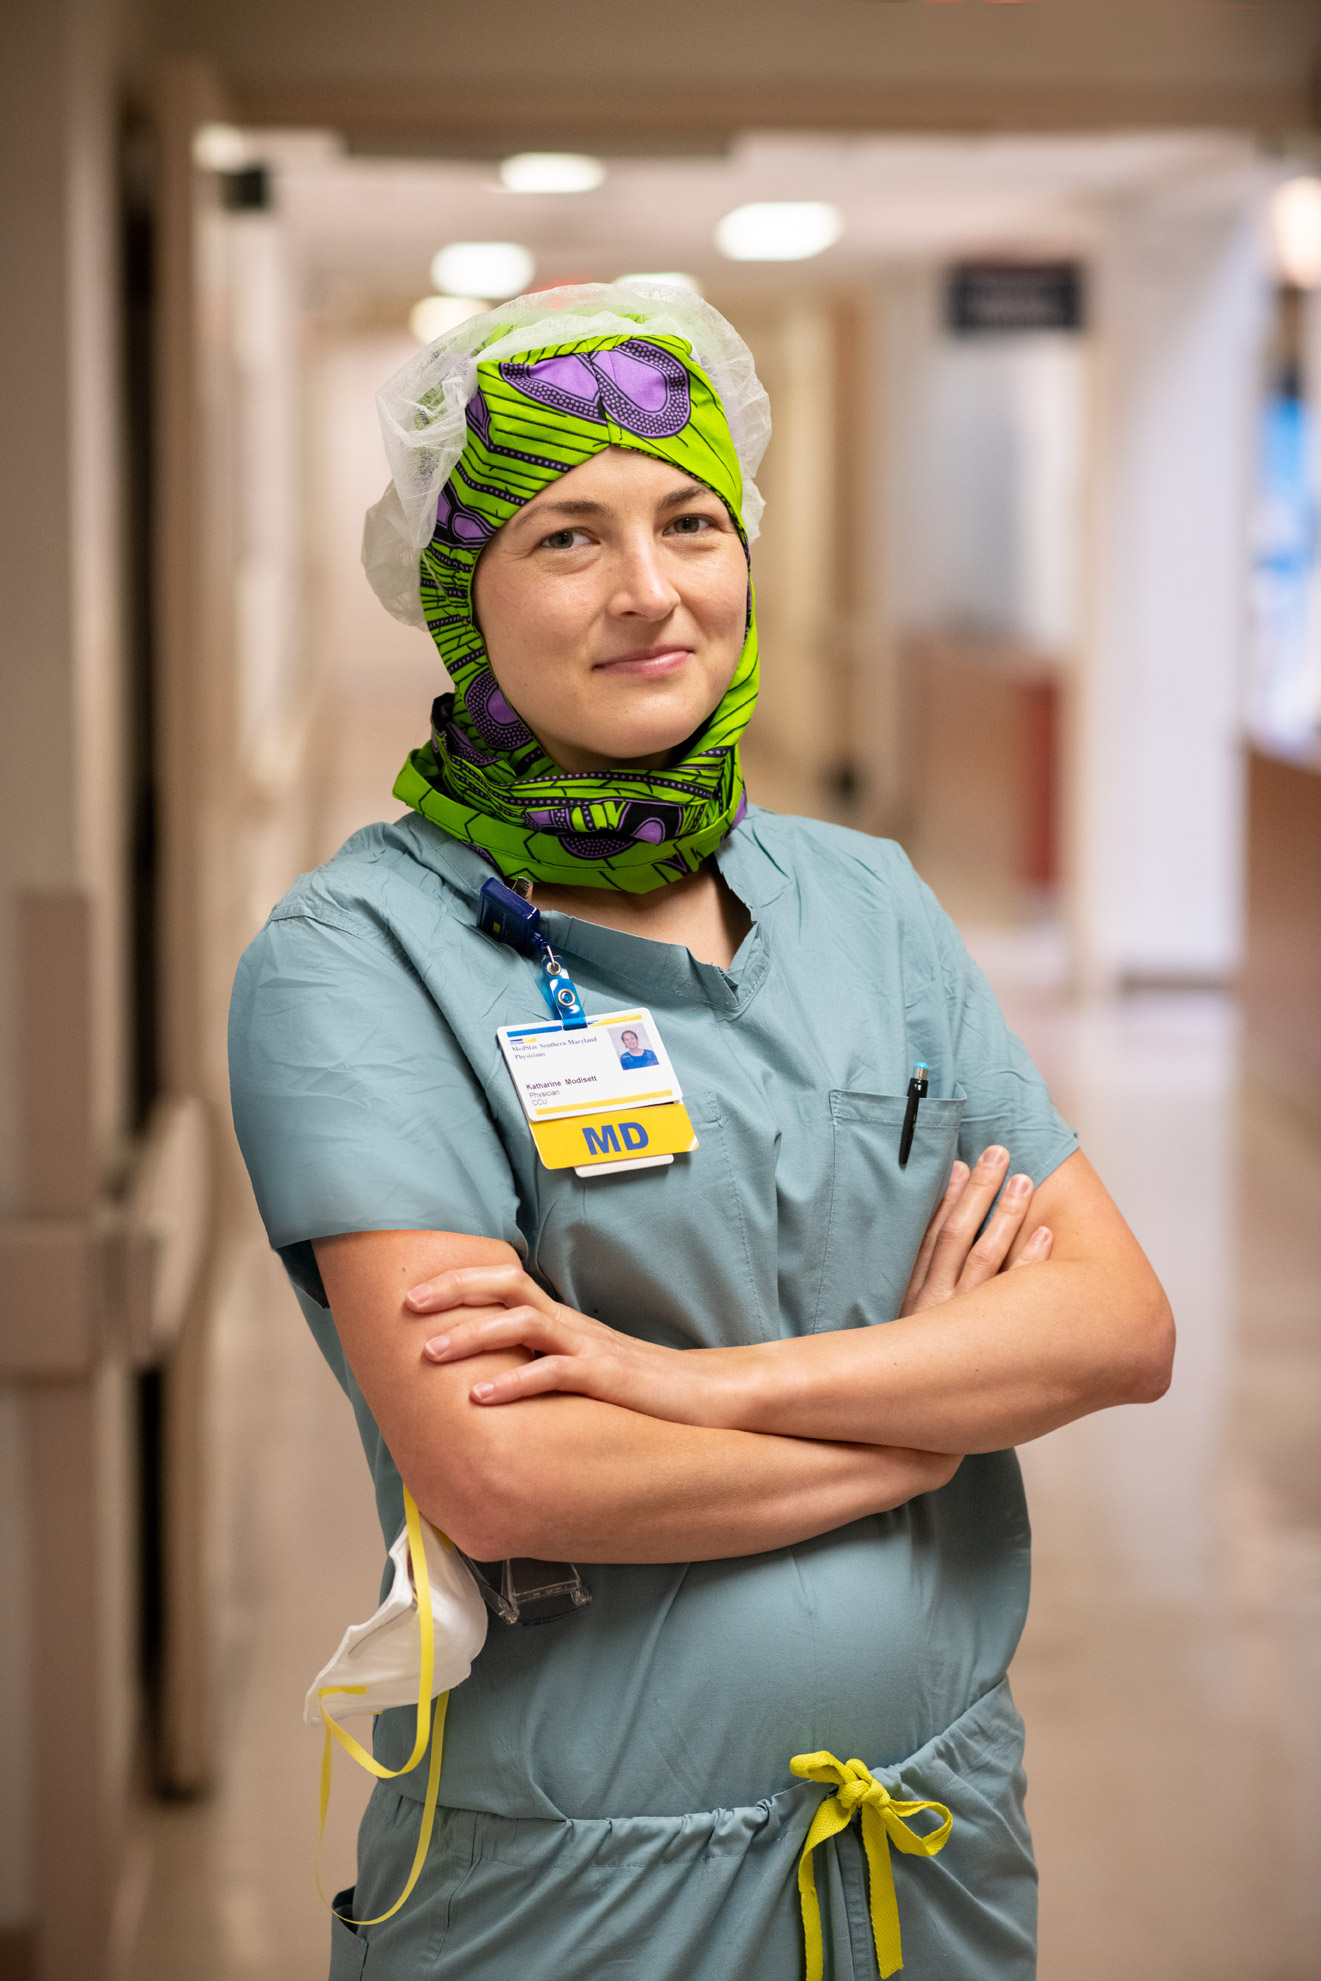 A hospital ICU doctor wearing scrubs standing with arms folded in a hallway